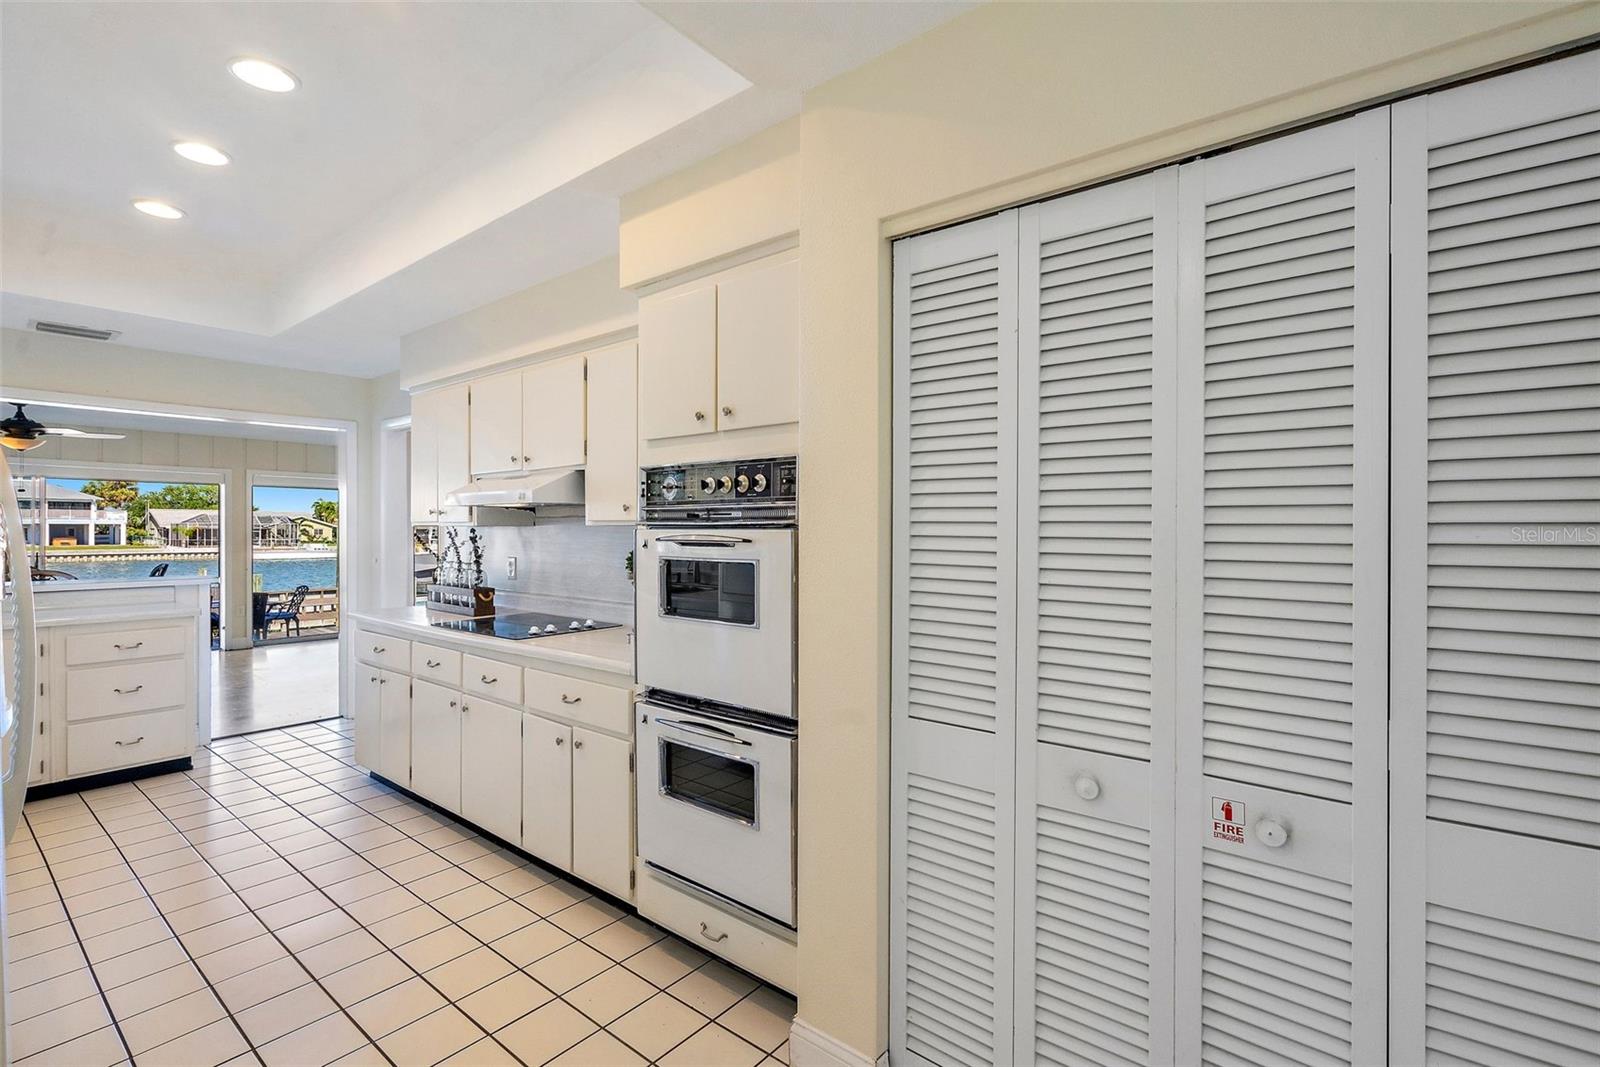 It is a testimony to how well-conceived the original kitchen was. There is a cooktop, with hood and separate double-ovens THAT STILL WORK! There is a recessed ceiling; AND, a spacious pantry measuring almost 3.5' deep by 6' wide!